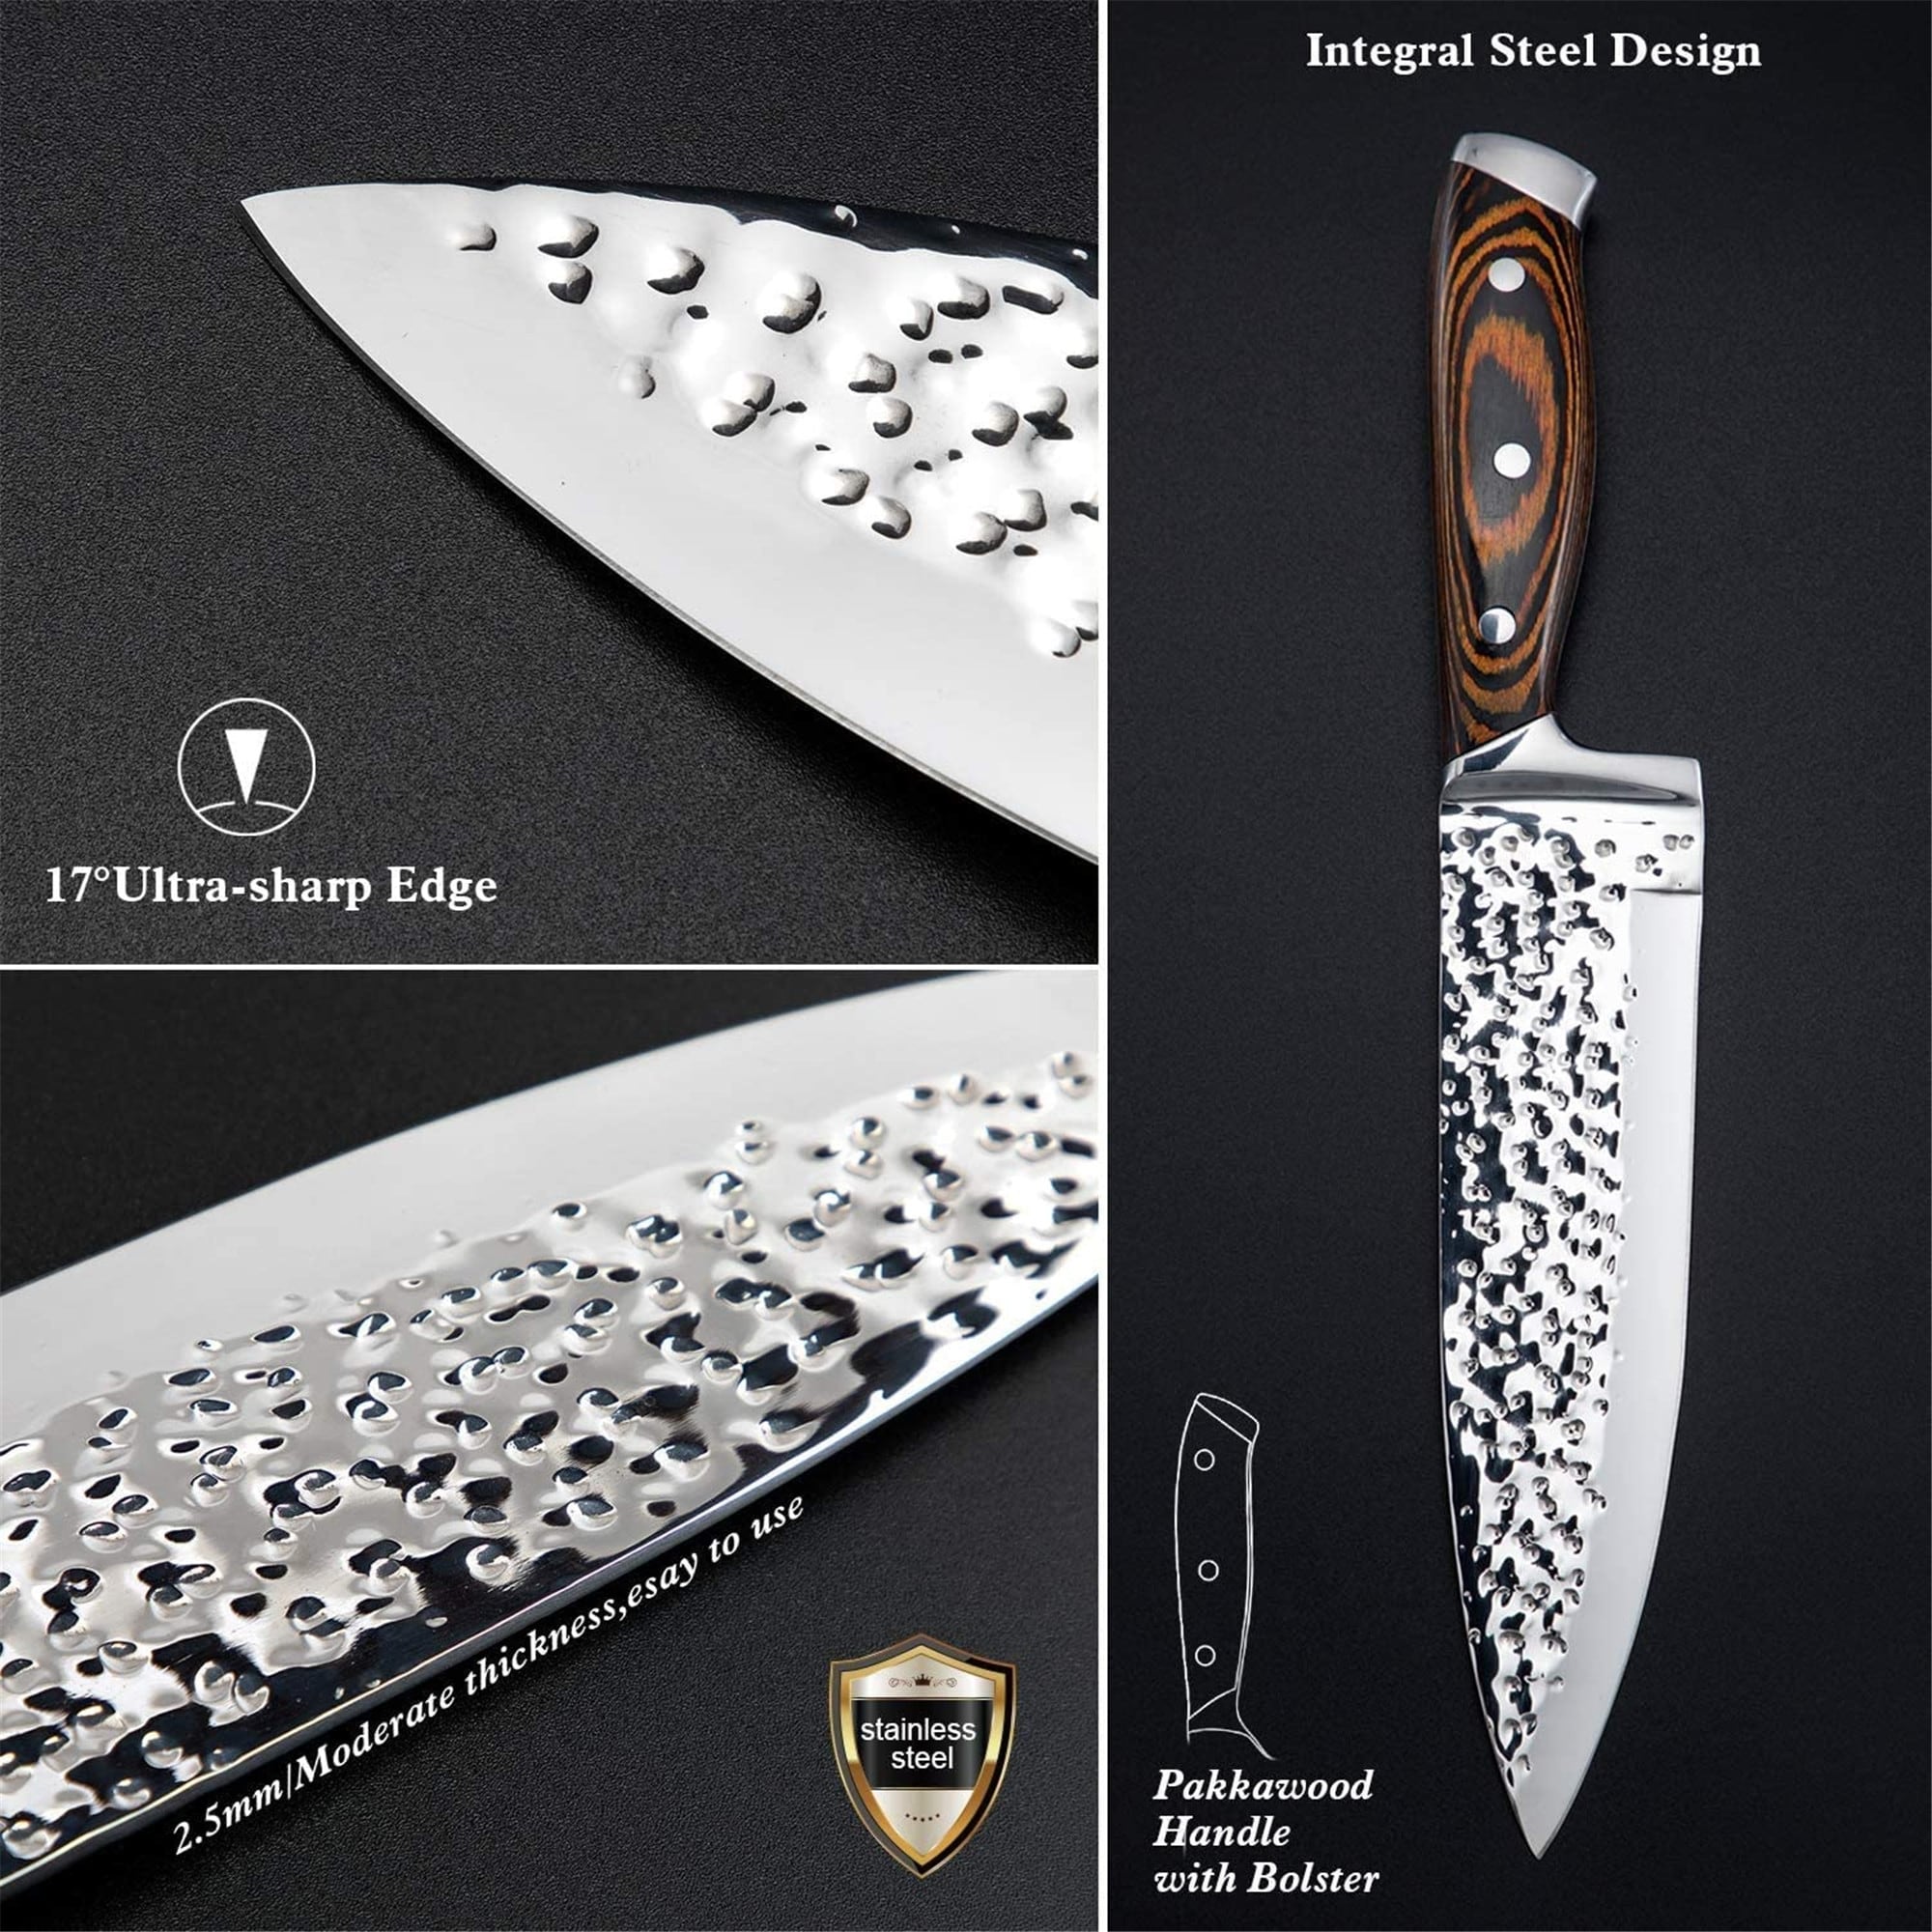 https://ak1.ostkcdn.com/images/products/is/images/direct/624dd097153f28da58db6c891e8c355933410a40/Knife-Set%2C-Elegant-Life-15-Piece-Kitchen-Knife-Set-with-Block-Wooden%2C-Manual-Sharpening-for-Chef-Knife-Set%2C-Self-Sharpening.jpg